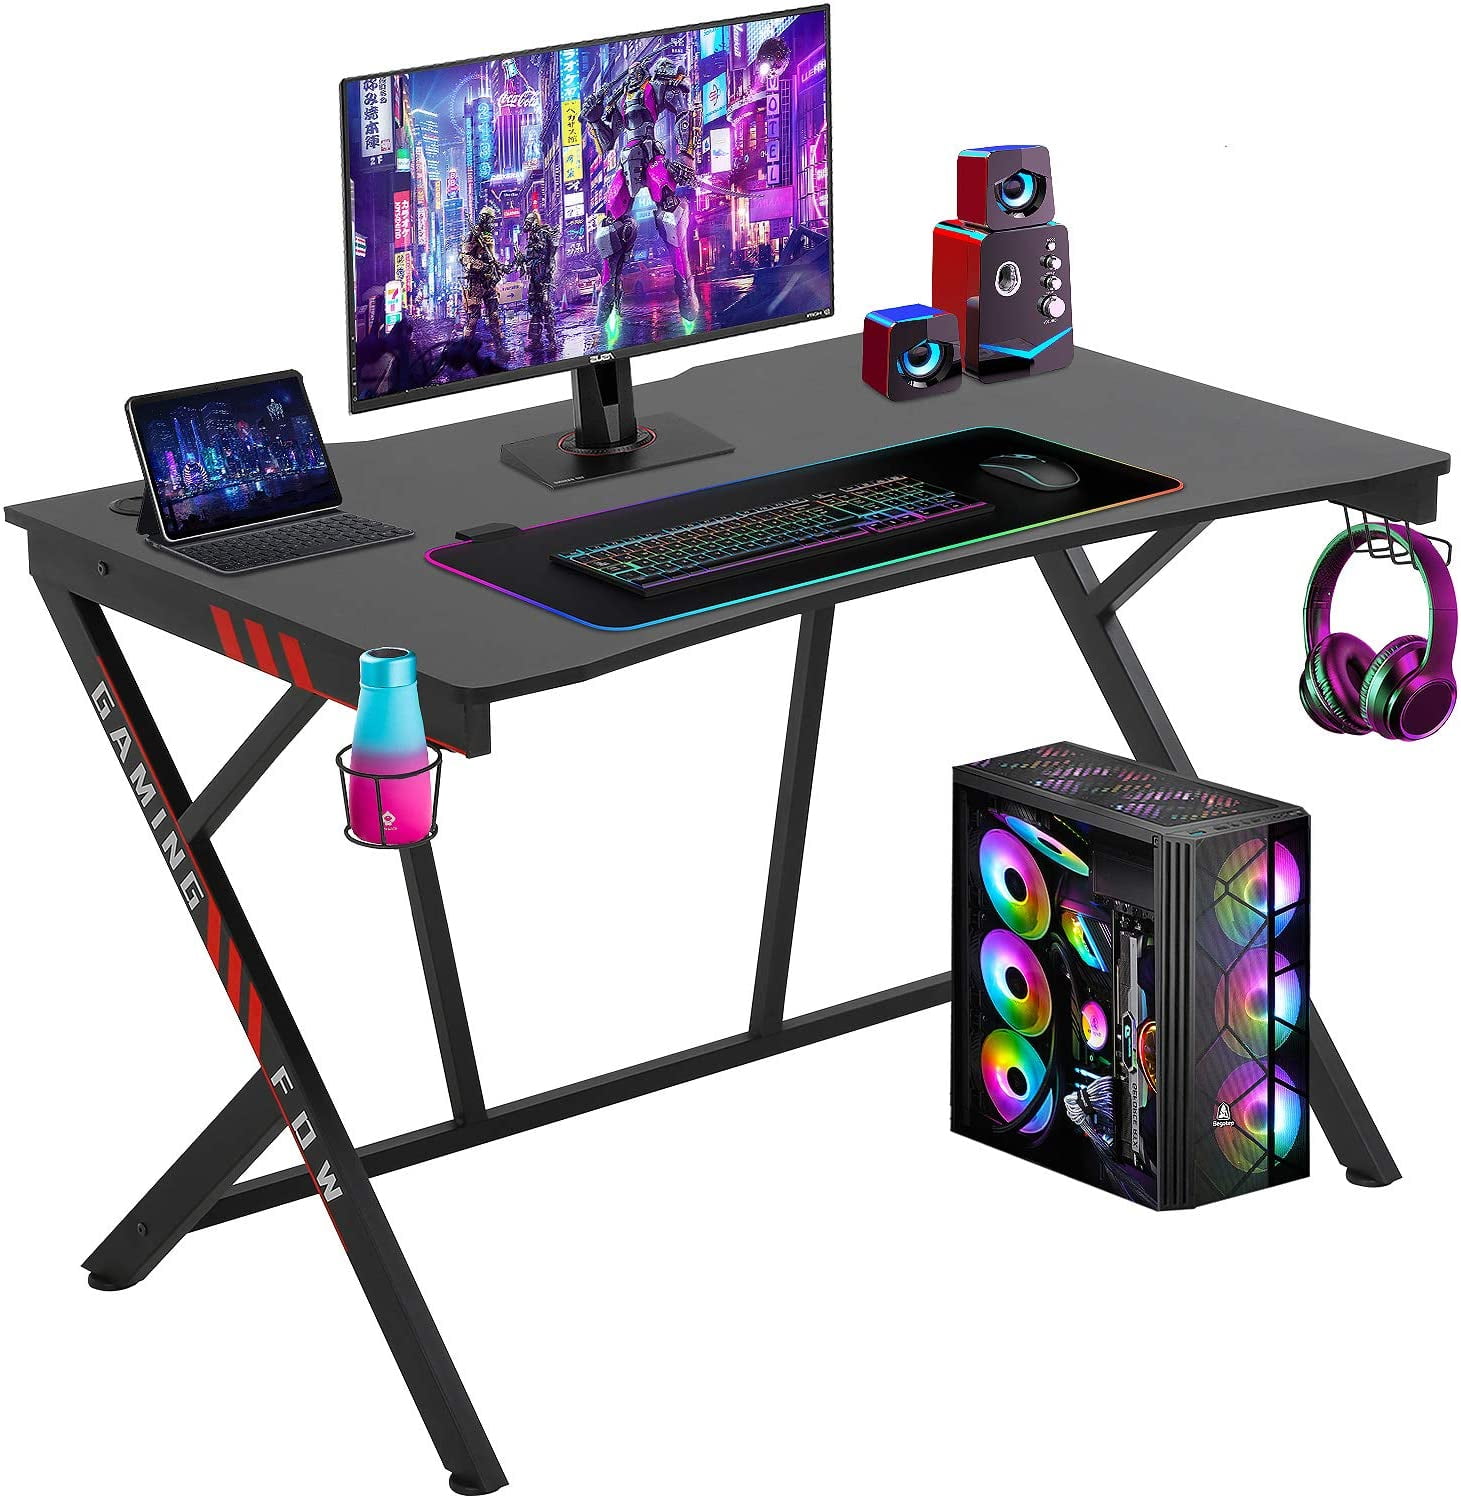 Black GTRACING Gaming Desk Computer Office PC Gamer Table Racing Style Professional Game Station Z-Shaped with Gaming Controller Tablet Stand & Cup Holder 